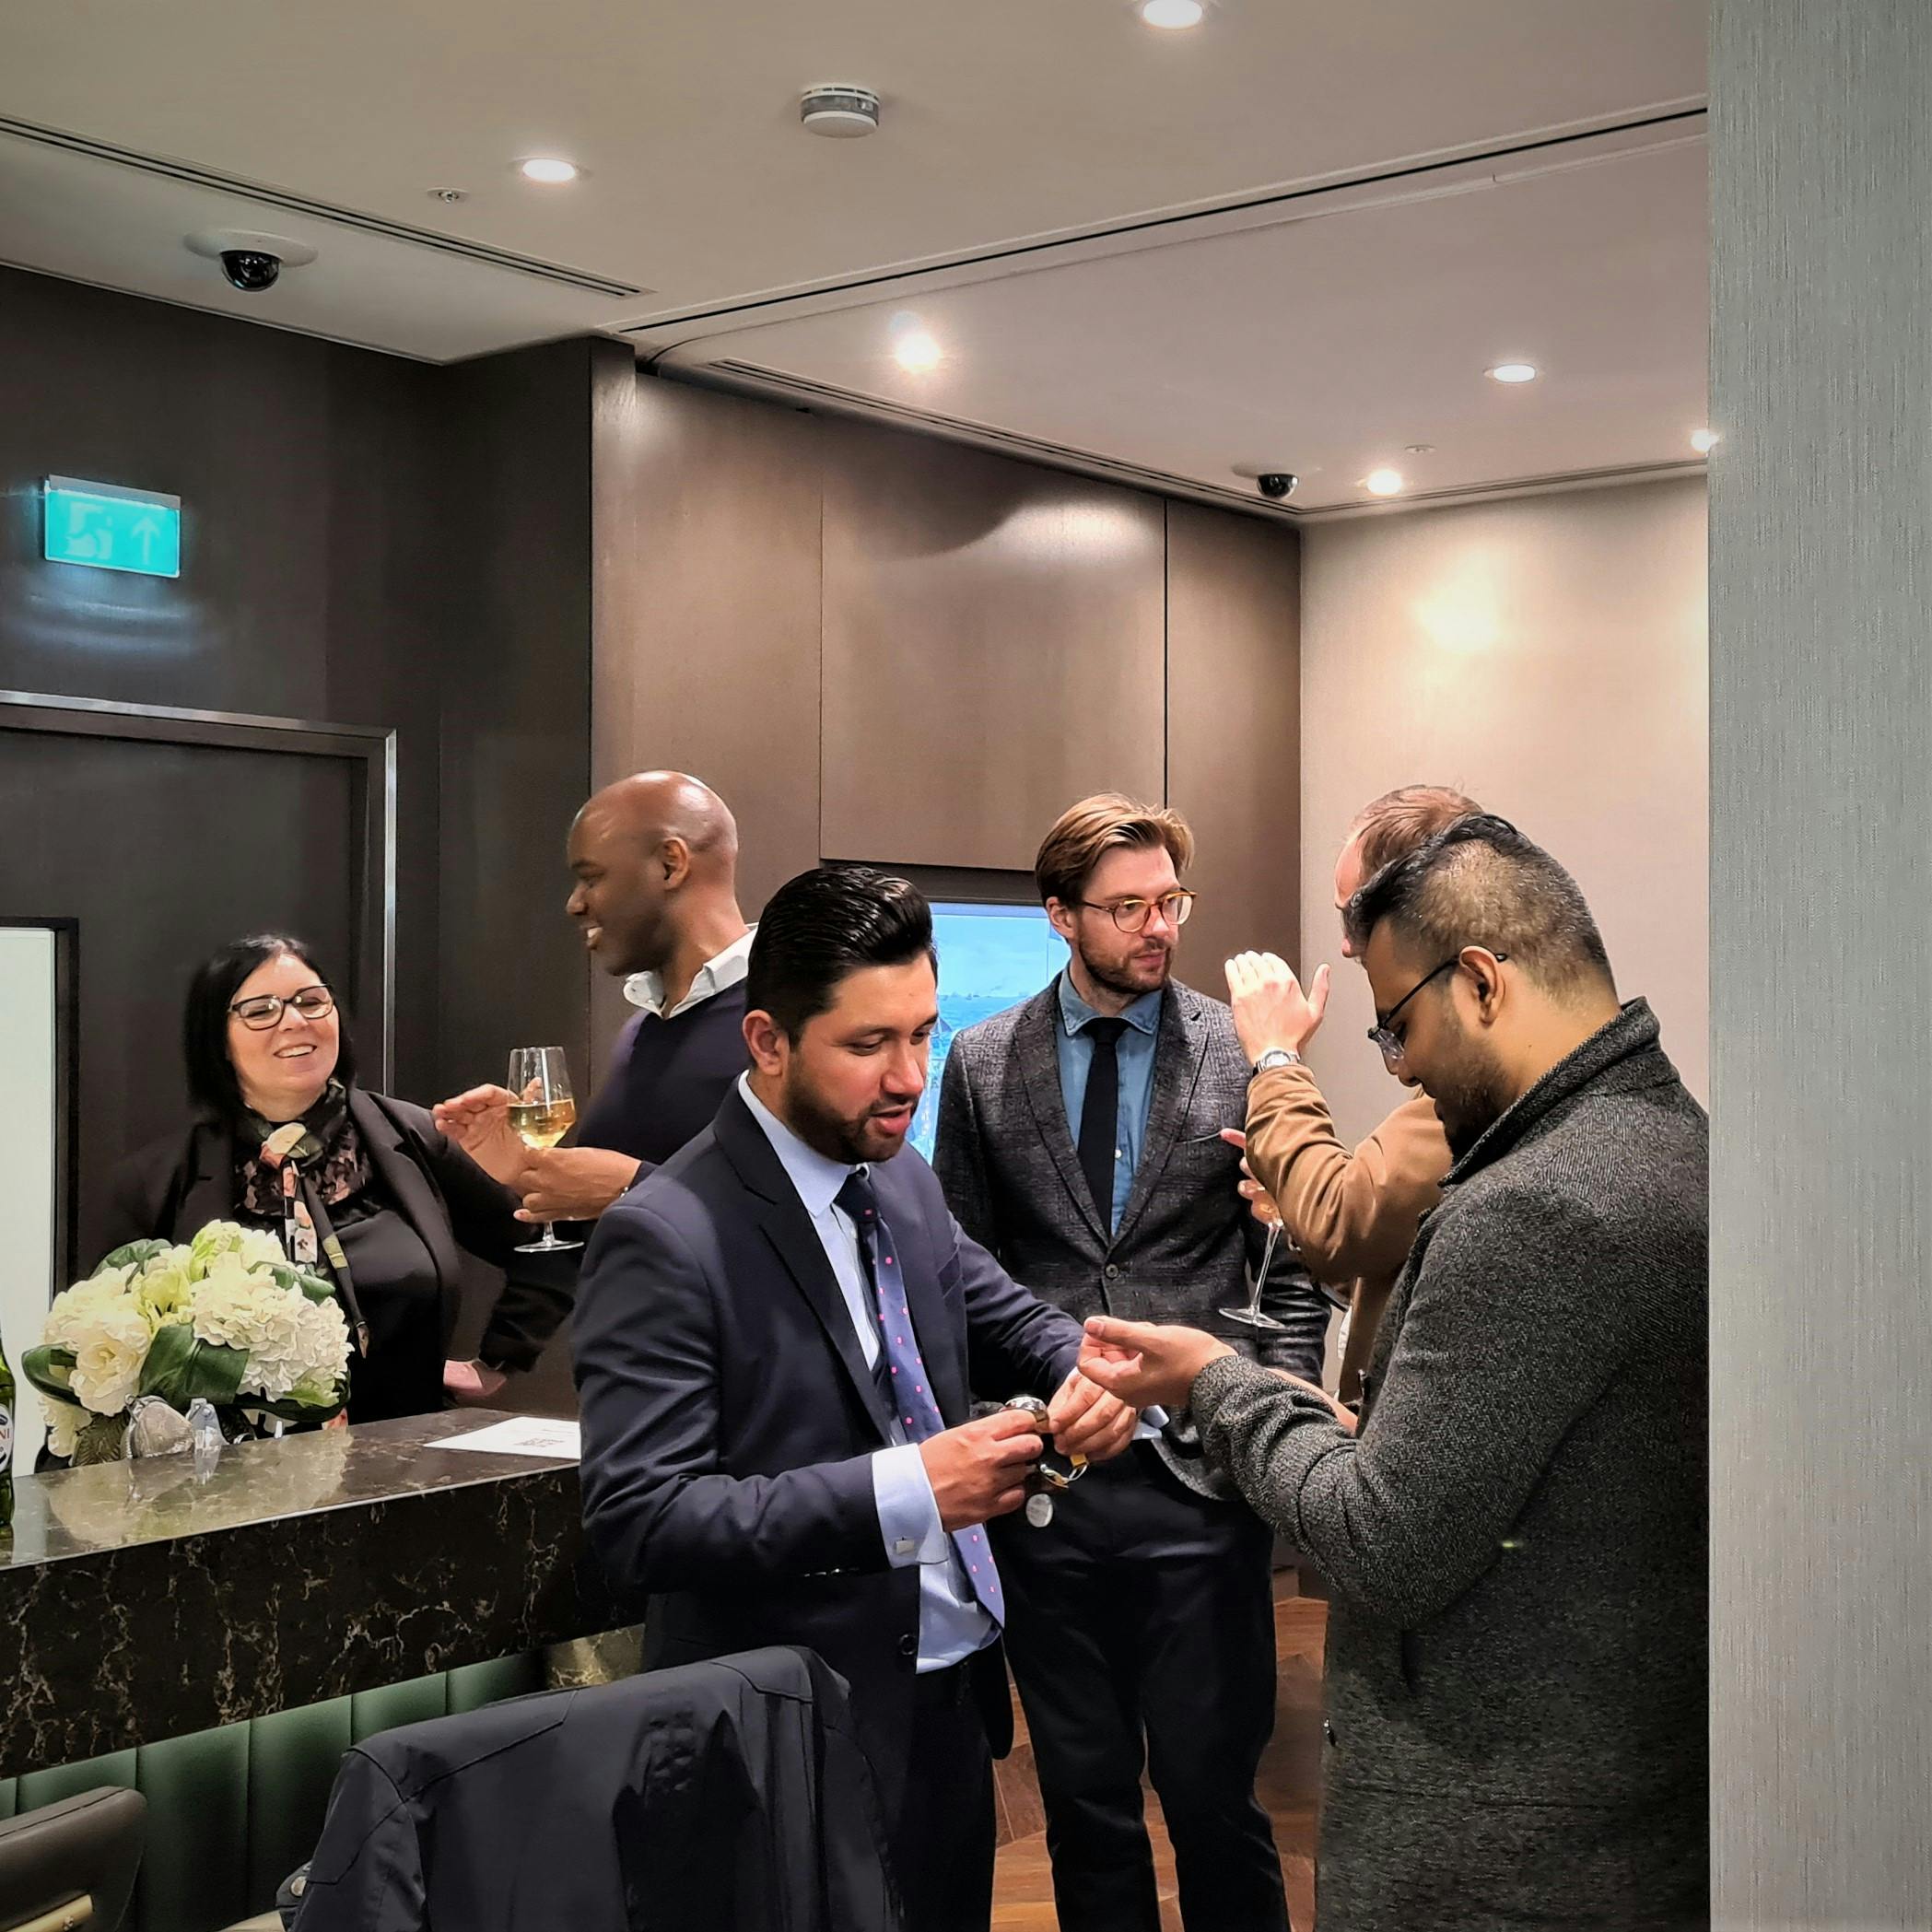 People at our Recent April Event with a Retail Partner talking about watches.